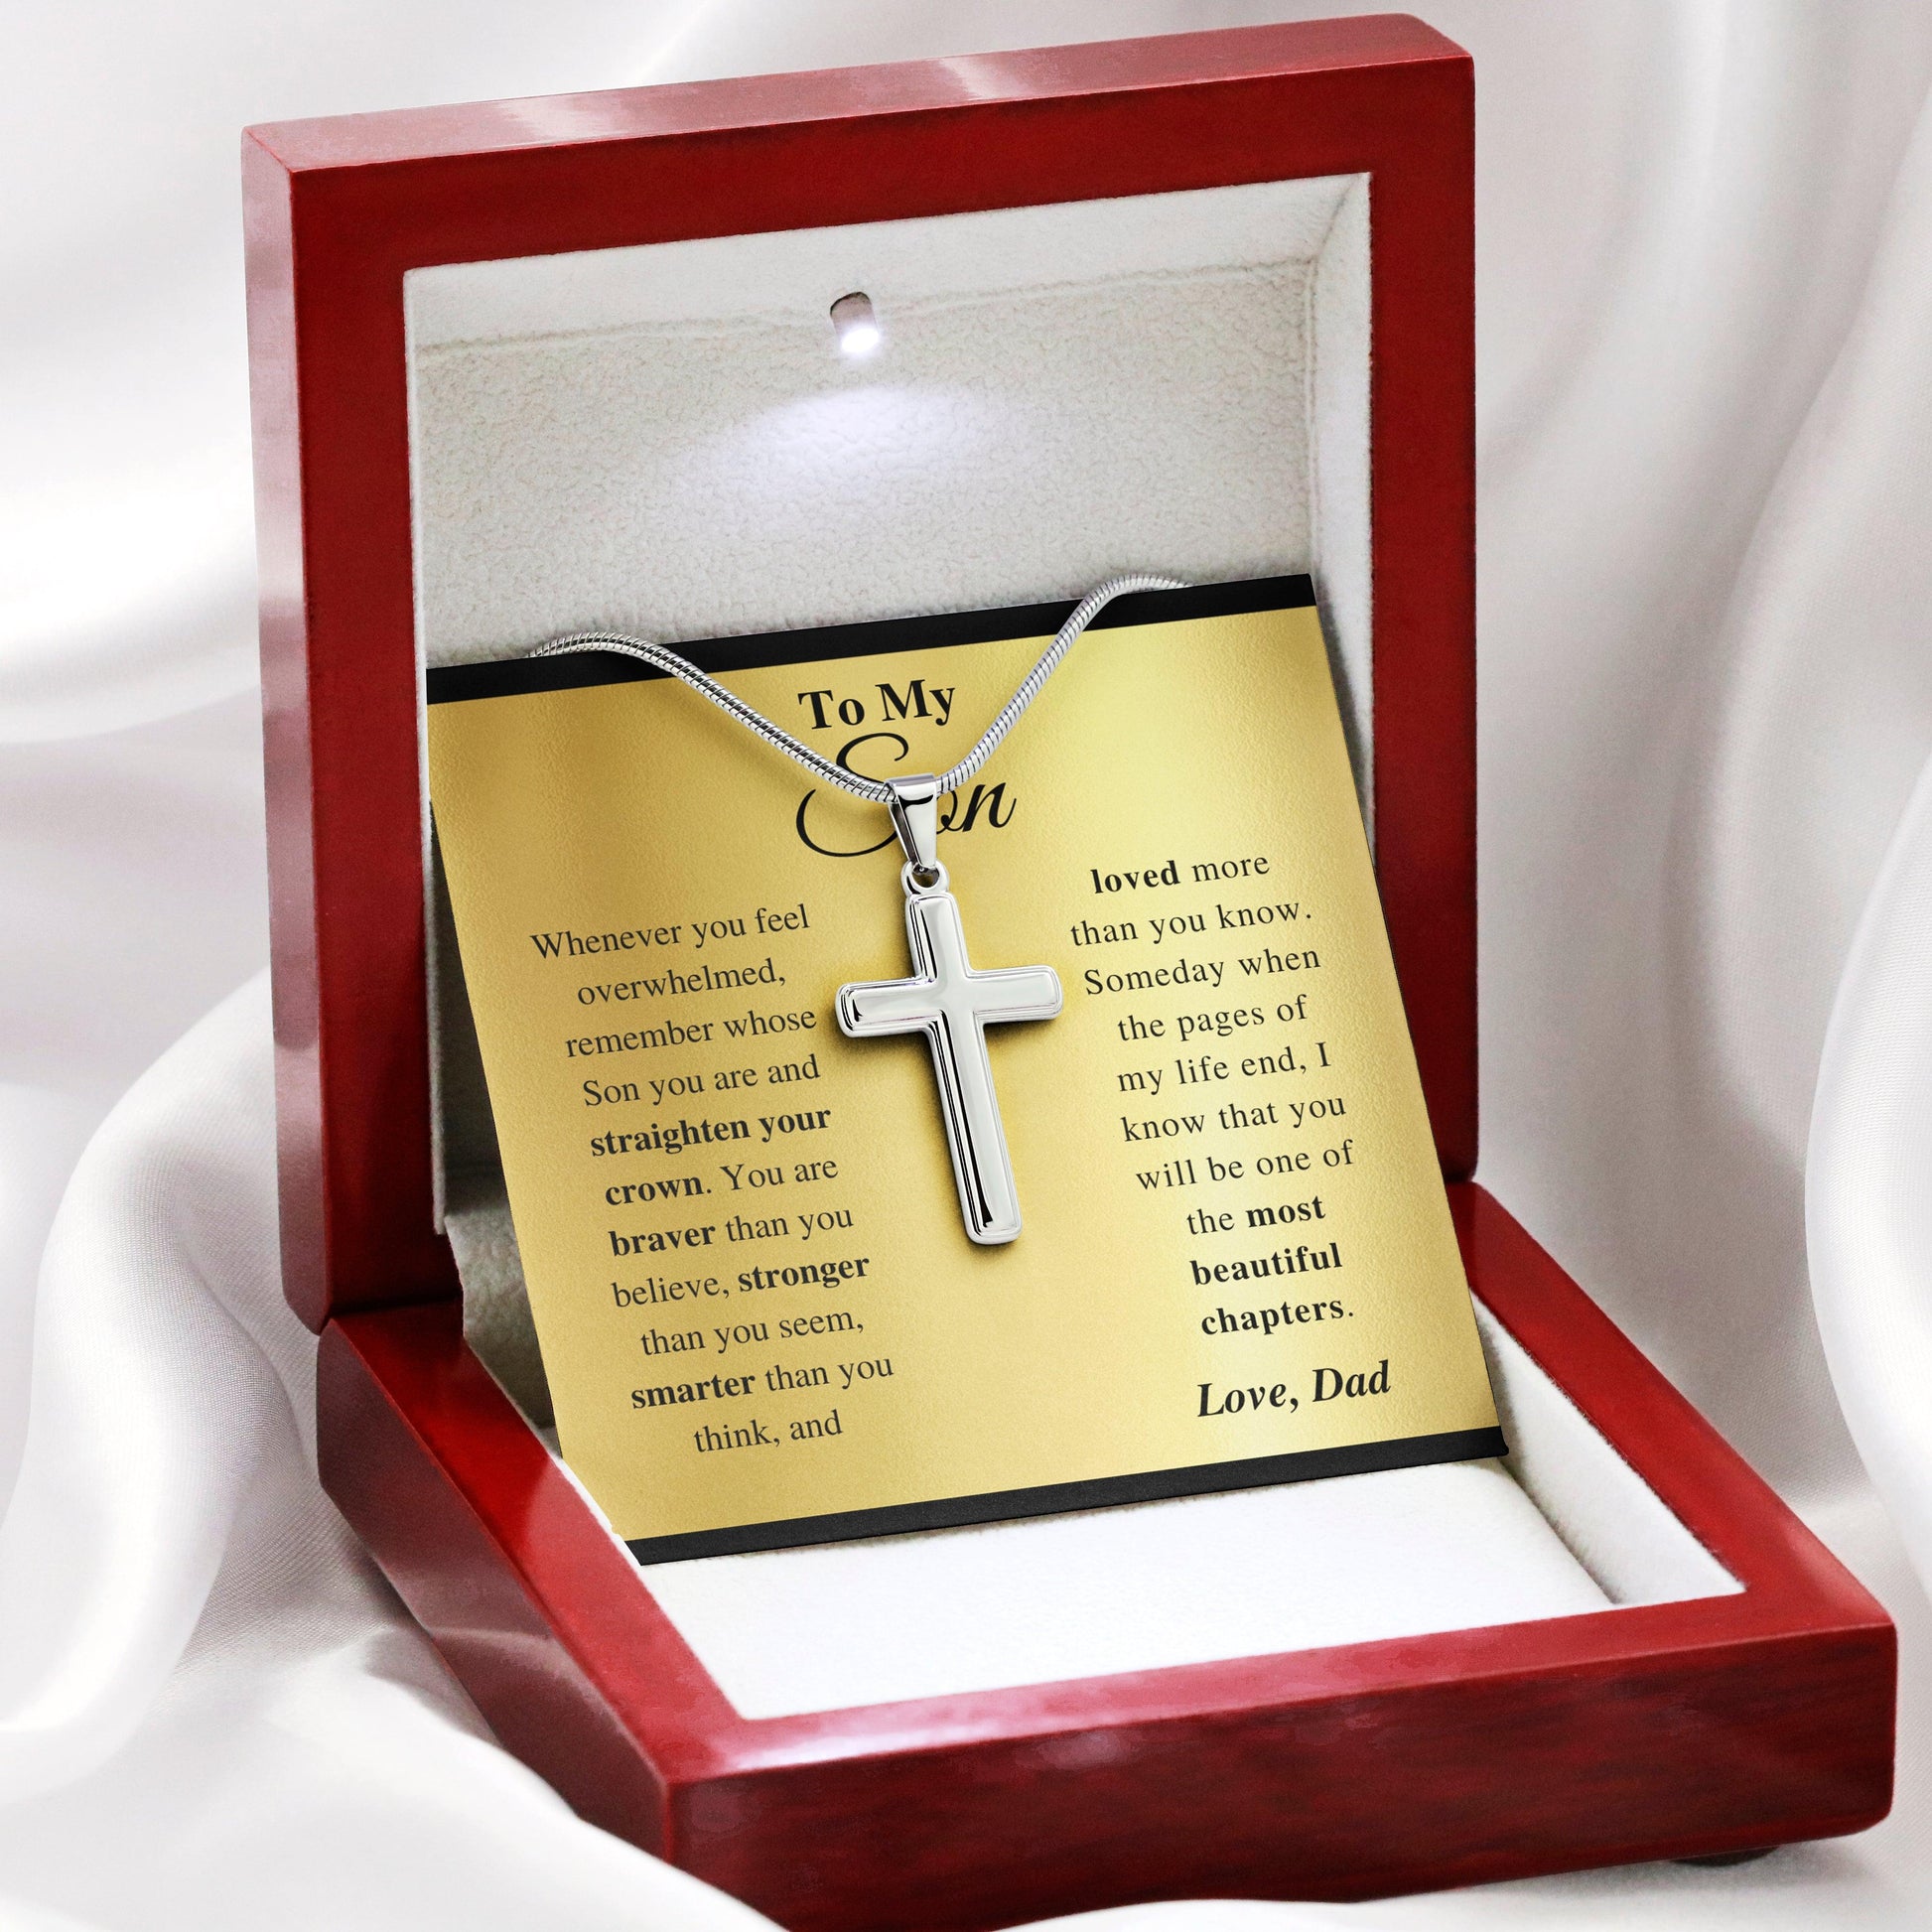 Jewelry gifts Son - Pages Of My Life - Cross Gift Necklase - Belesmé - Memorable Jewelry Gifts